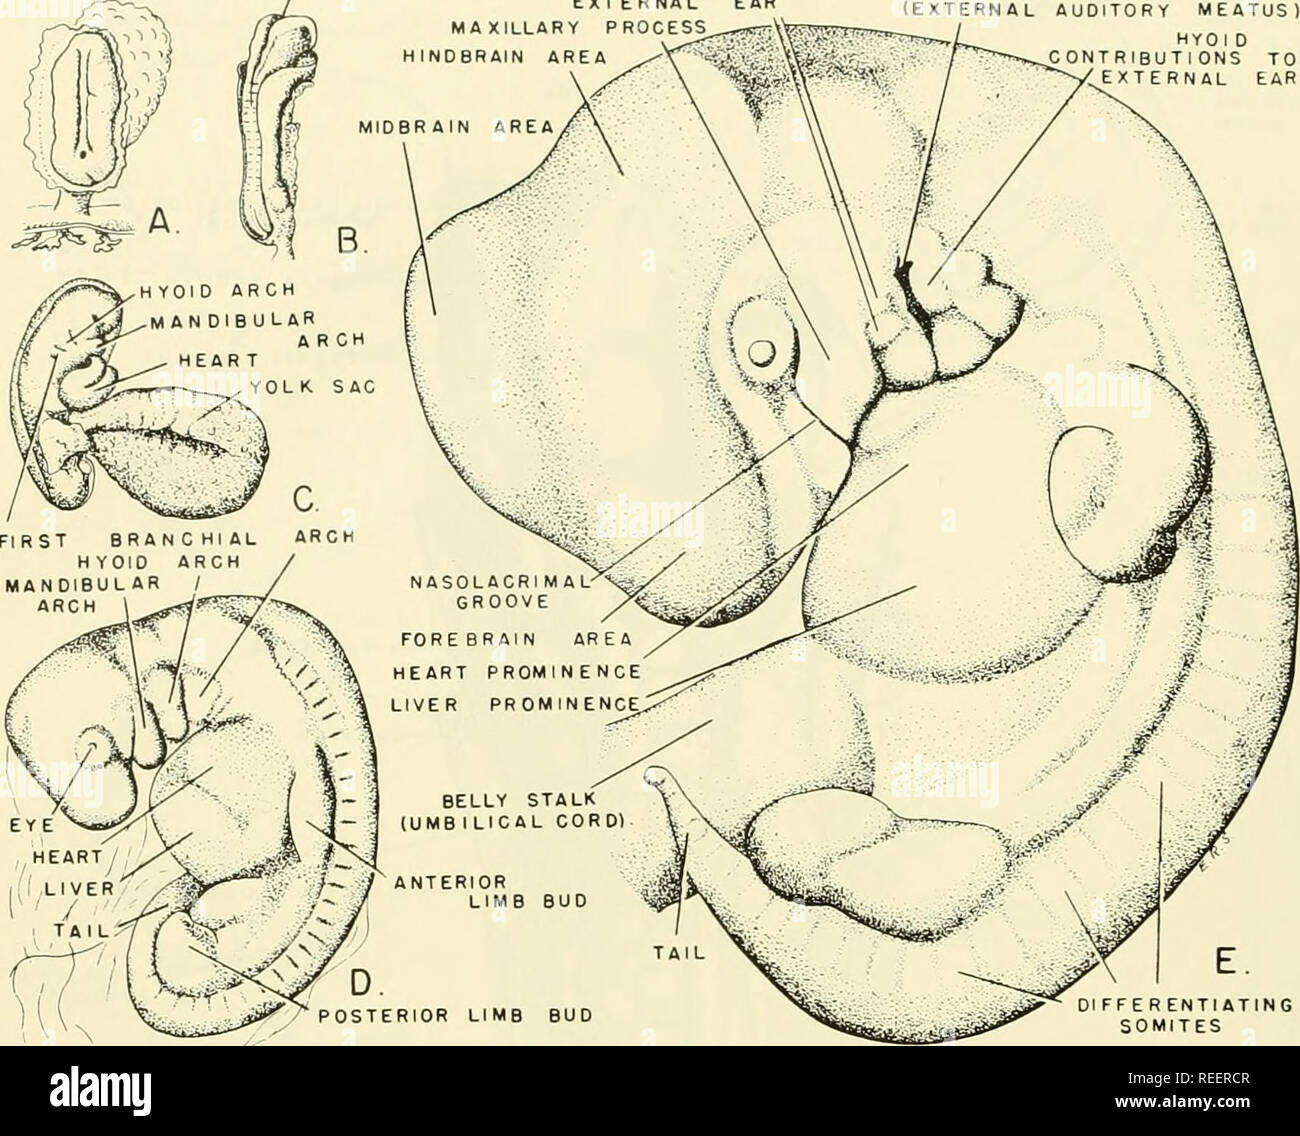 . Comparative embryology of the vertebrates; with 2057 drawings and photos. grouped as 380 illus. Vertebrates -- Embryology; Comparative embryology. 500 DEVELOPMENT OF PRIMITIVE BODY FORM ANTERIOR NEUROPORE MANDIBULAR CONTRIBUTION TO FIRST BRANCHIAL GROOVE ^&quot;â ''E*&quot;^*'- EAR (EXTERNAL AUDITORY MEATUS) HYOI D TRIBUTIONS TO EXTERNAL EAR. DIFFE RENTI ATING SOMITES Fig. 246. Development of body form in human embryo. (C from Keibel and Mall: Manual of Human Embryology, Vol. I, 1910. Philadelphia and London, Lippincott. A, B, D, and E from Keibel and Elze: Normentafel zur Entwicklungsgeschk Stock Photo